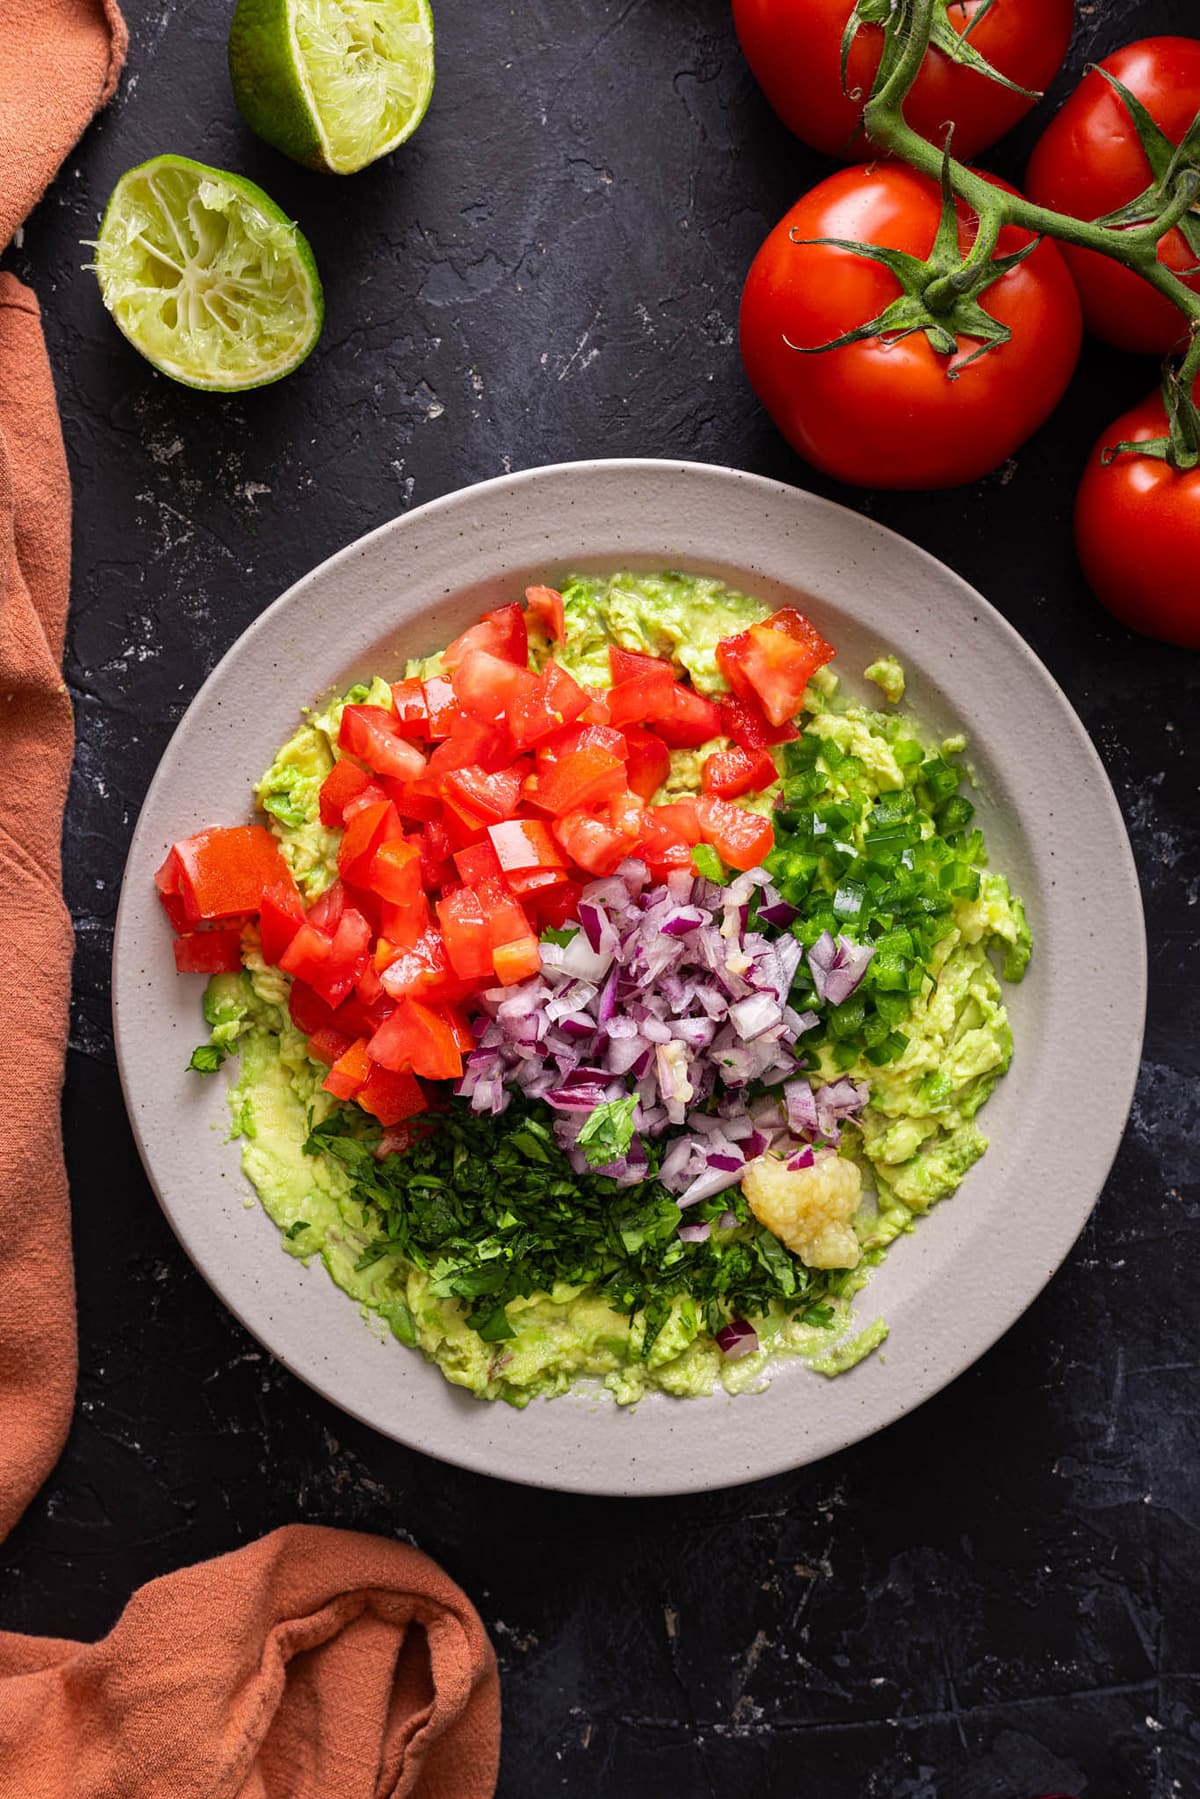 Diced tomatoes, red onions, cilantro, jalapenos, and garlic with smashed avocados in a bowl.